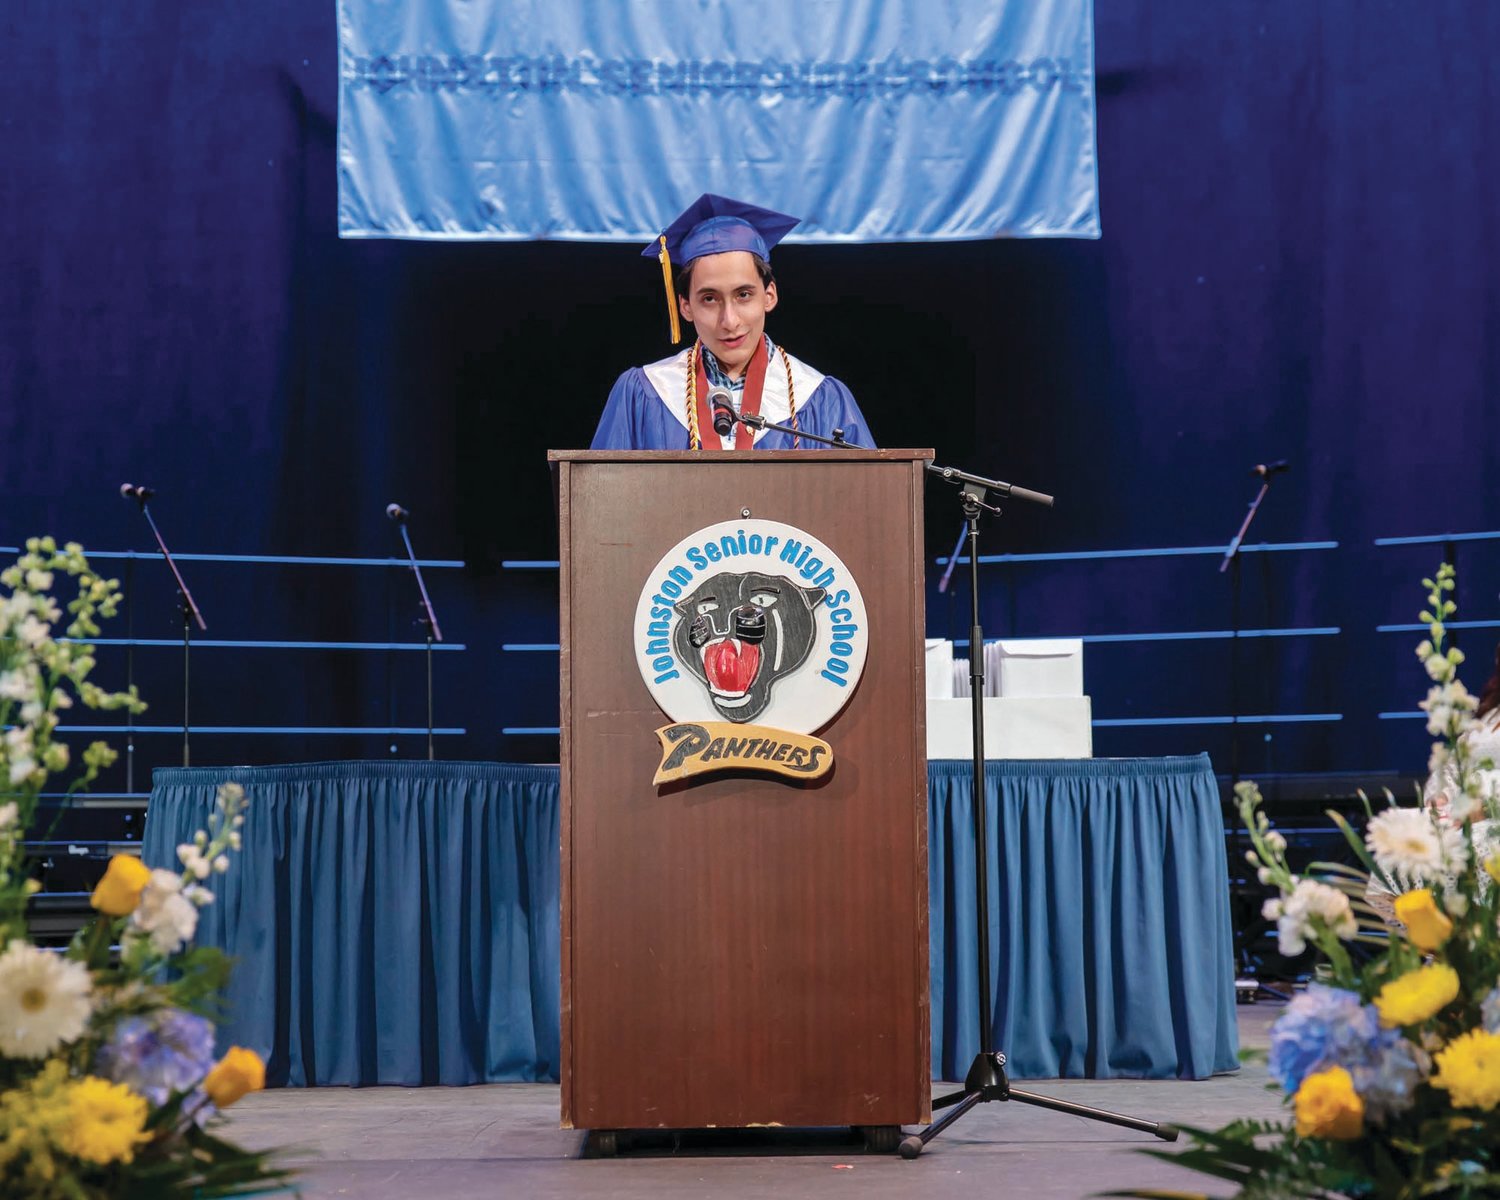 CAPTIVE AUDIENCE: The Johnston Senior High School Class of 2022 listened intently as the Co-Valedictorians — Glorianna Crichlow and Victor M. Fragoso (pictured here) — delivered their commencement addresses. (Photos by Leo van Dijk/rhodyphoto.zenfolio.com)